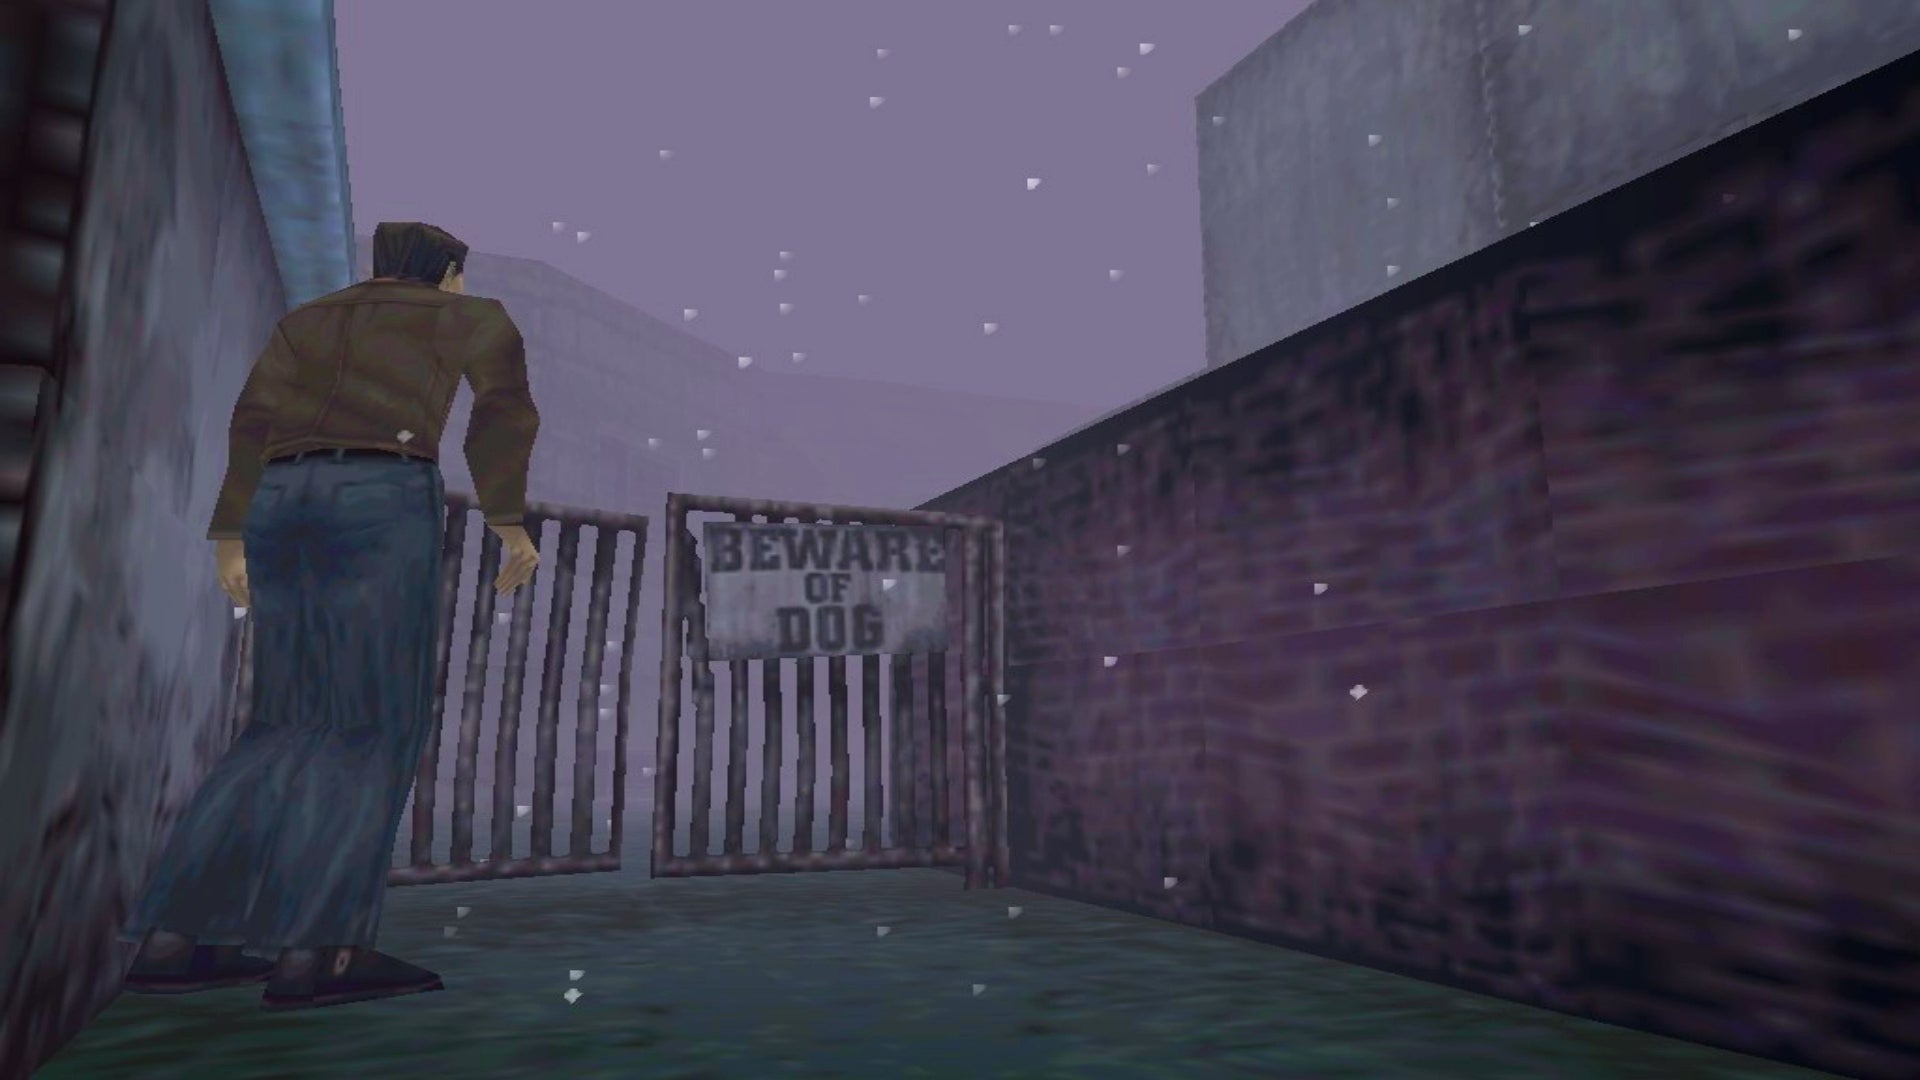 A scene from Silent Hill that shows James approaching a gate marked 'BEWARE OF DOG'.